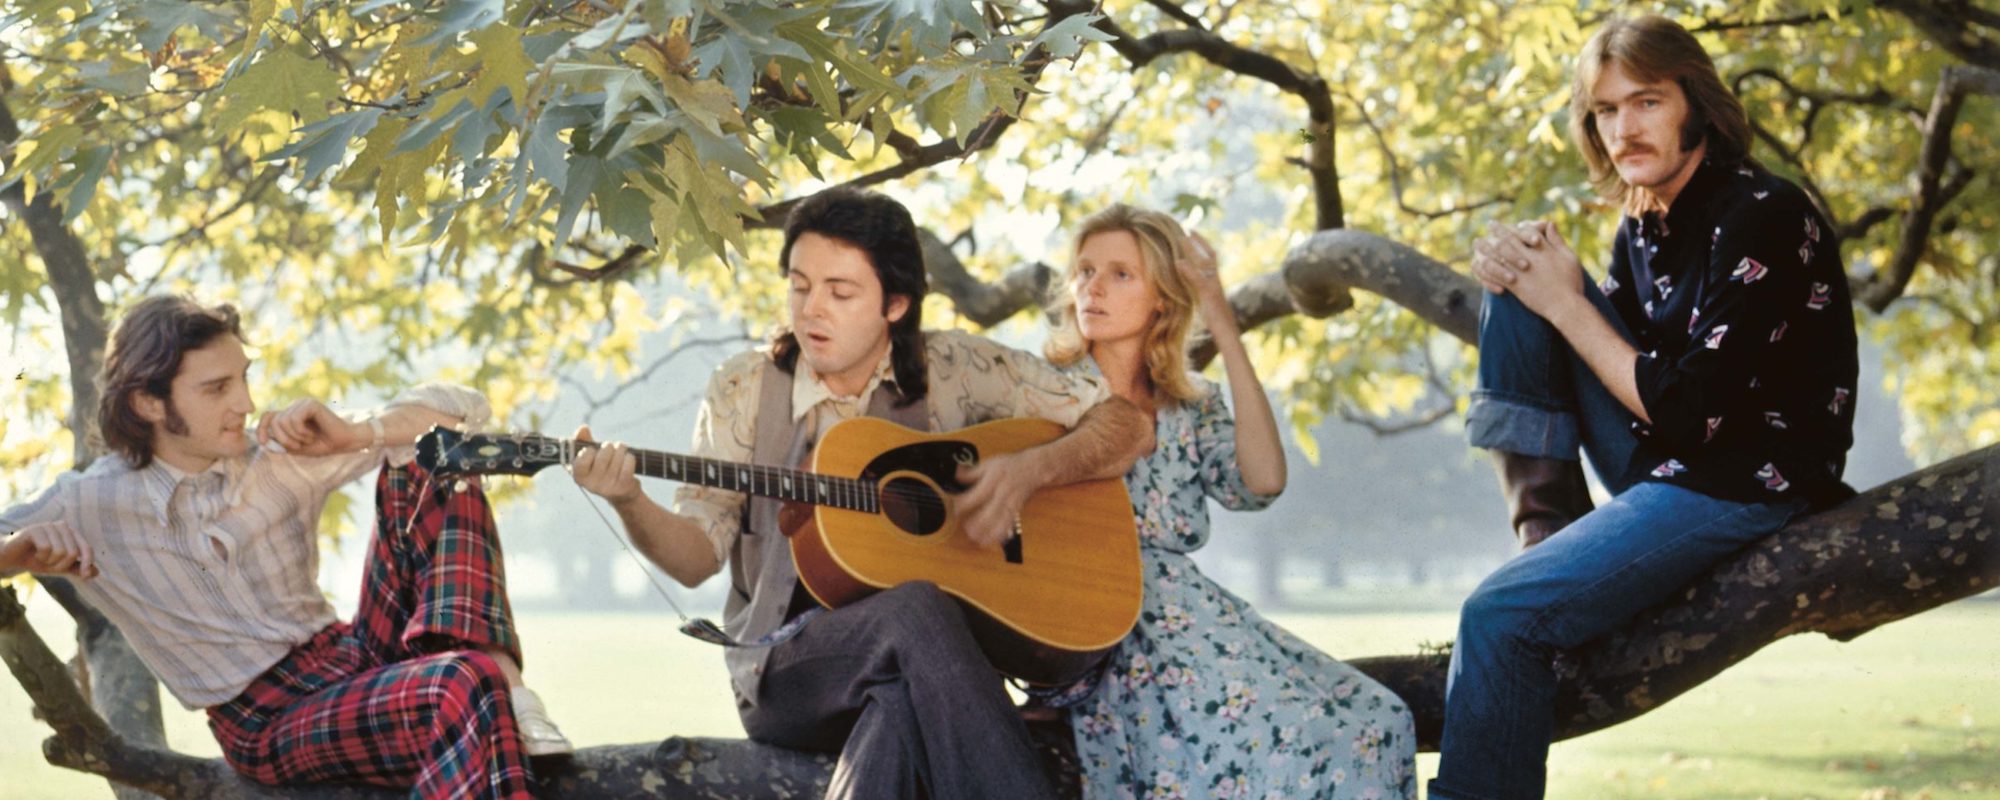 The Meaning Behind “Silly Love Songs” by Paul McCartney and Wings